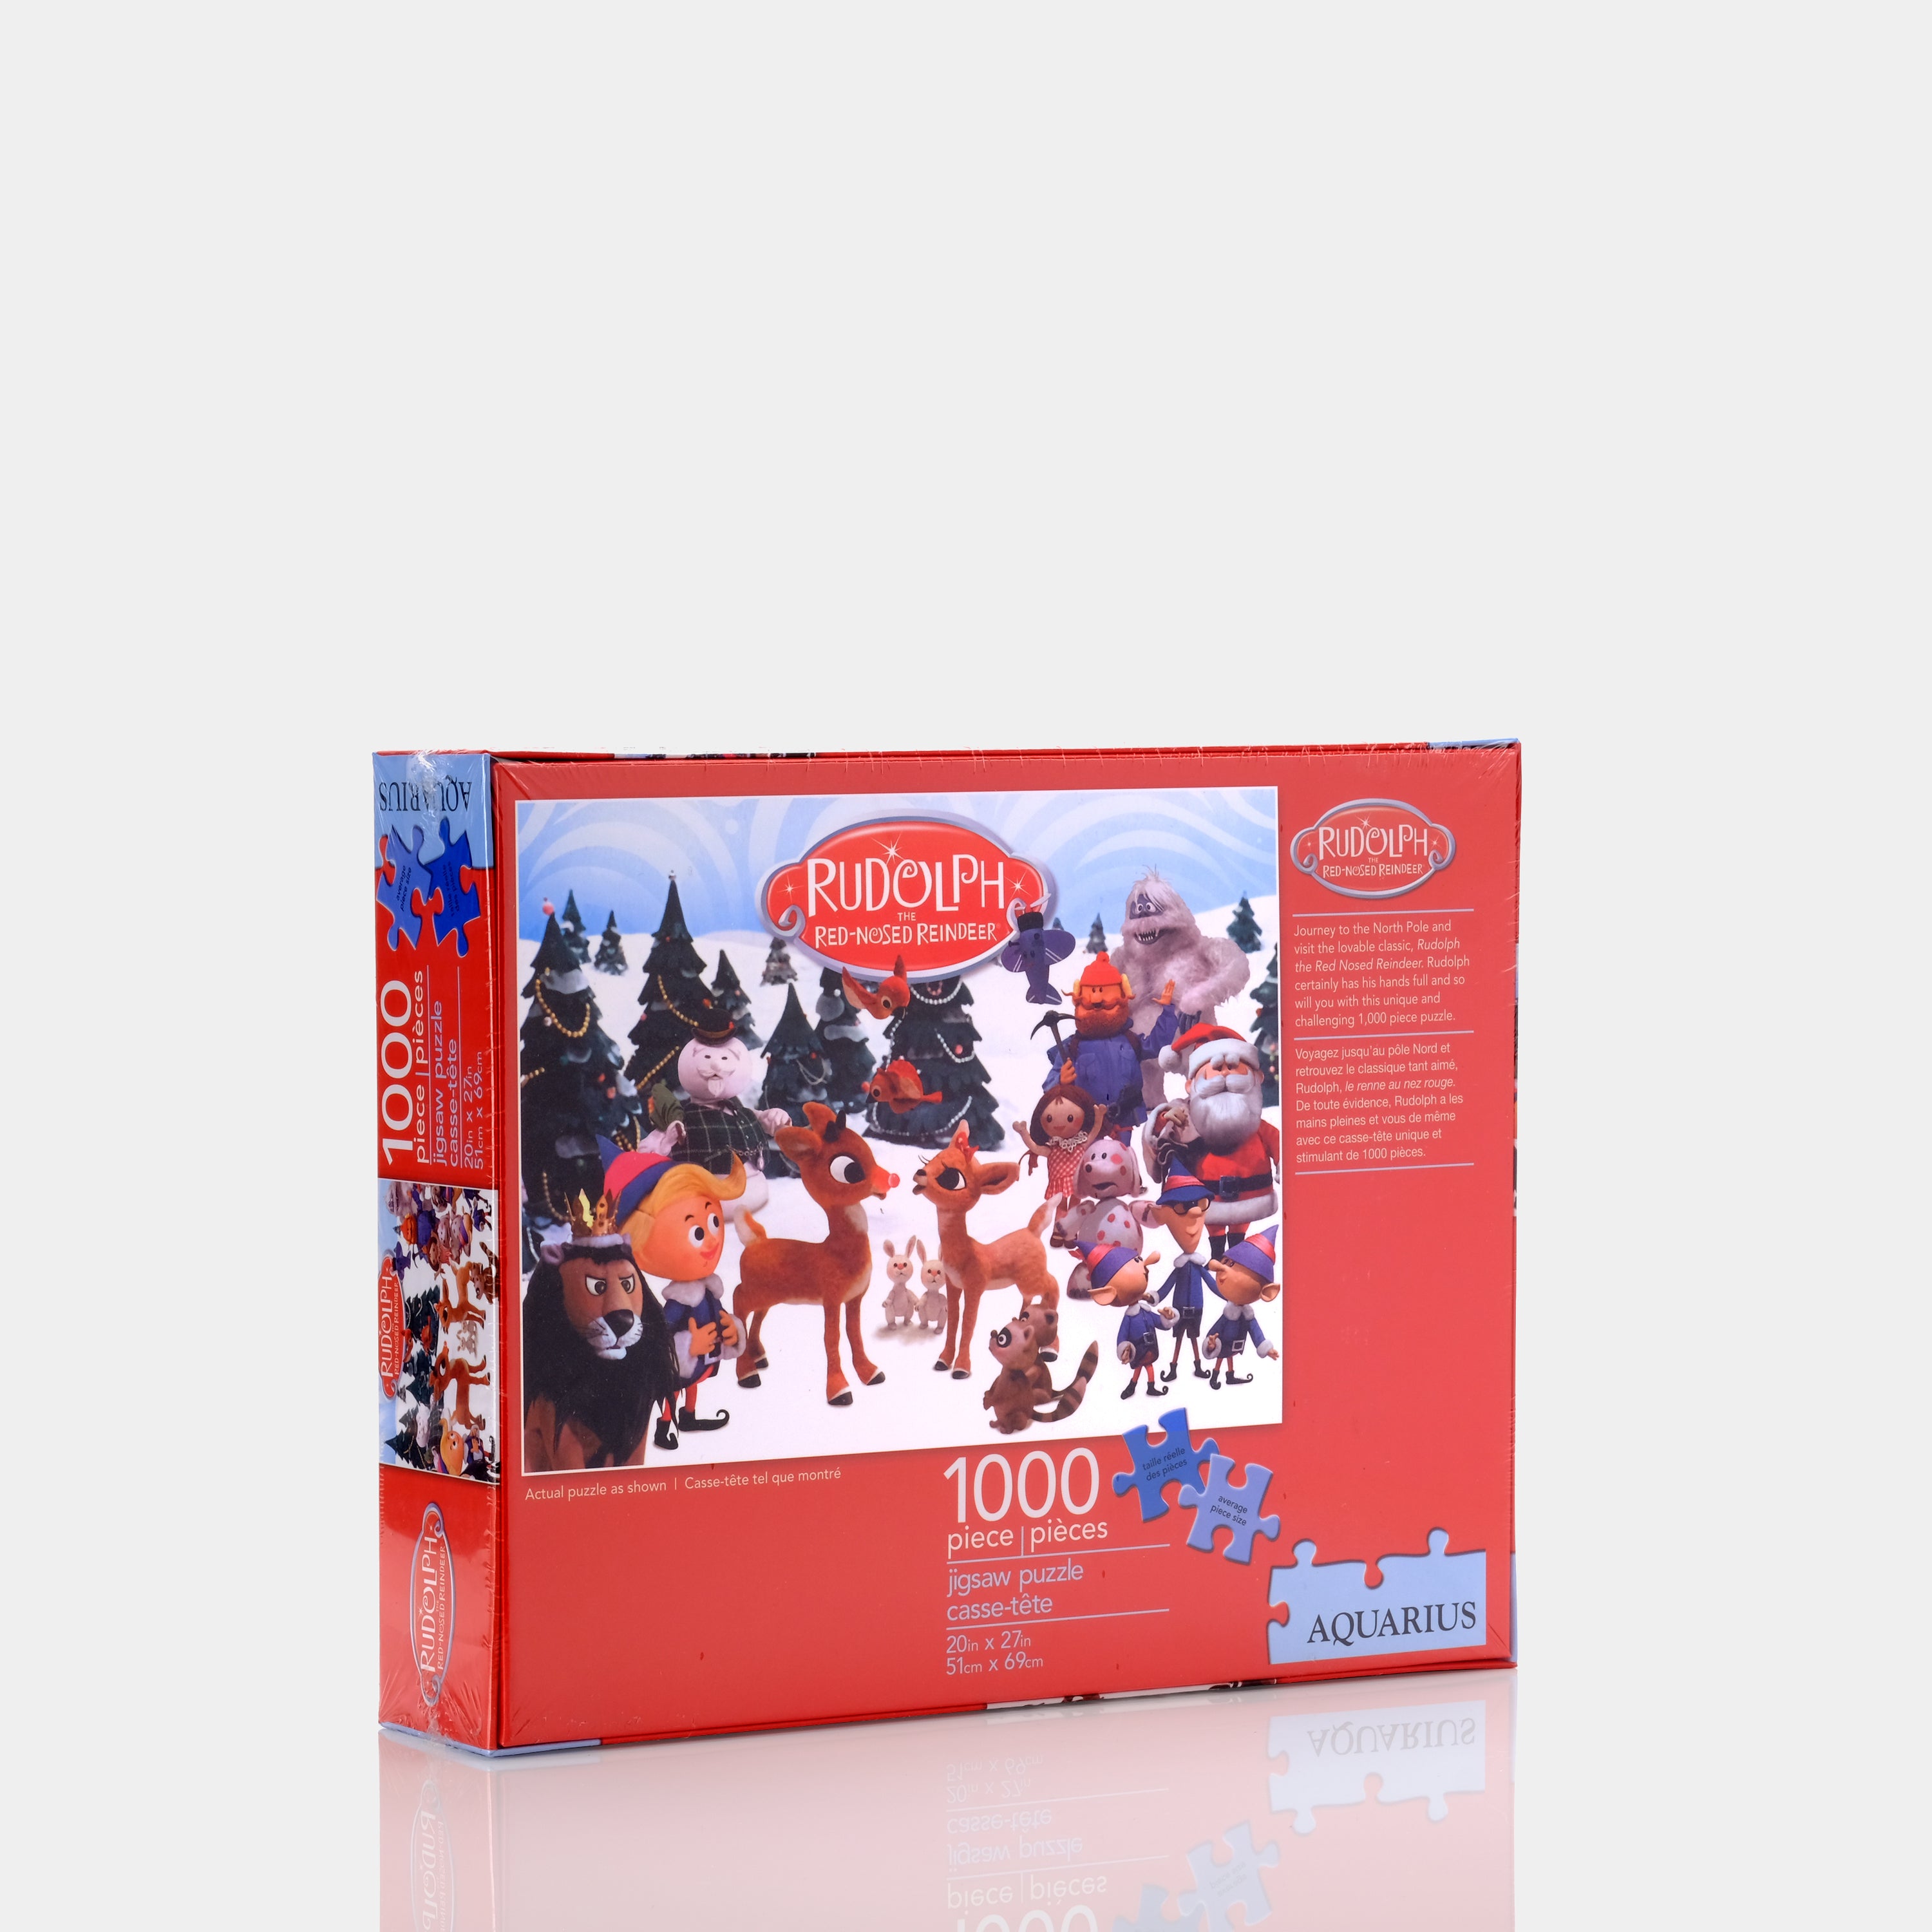 Rudolph The Red-Nosed Reindeer 1000 Piece Puzzle